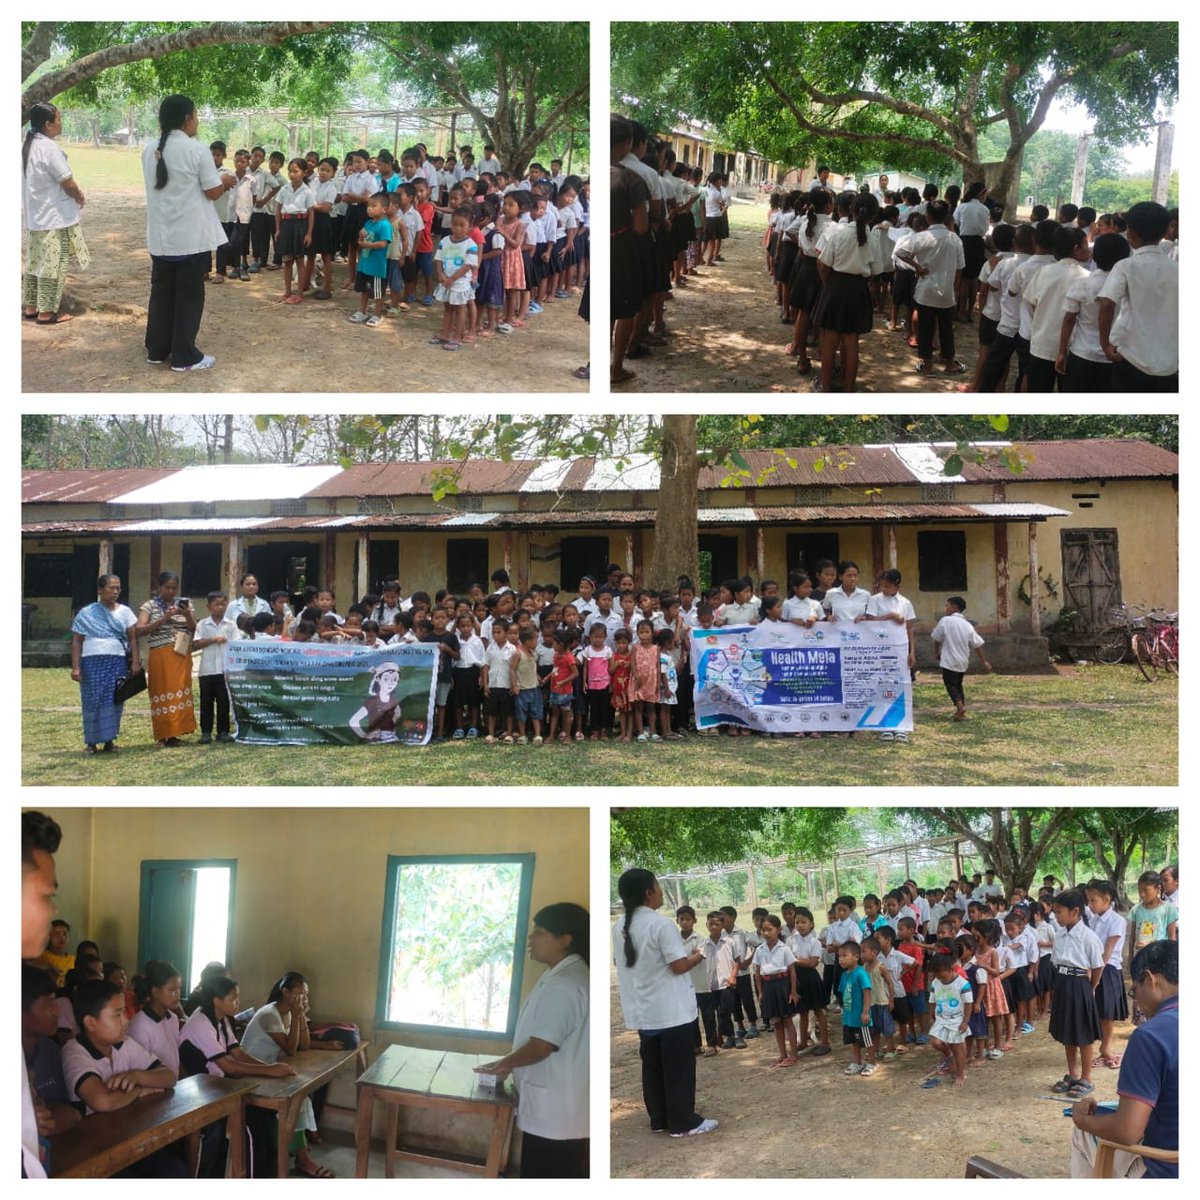 Health mela cum school health programme was organized at Tengasot LP and UP School under Chilpara HWC #EastGaroHills. The event aimed to promote active case finding and mental health awareness, reaching out to the local community.
#CommunityHealth #MentalHealthAwareness